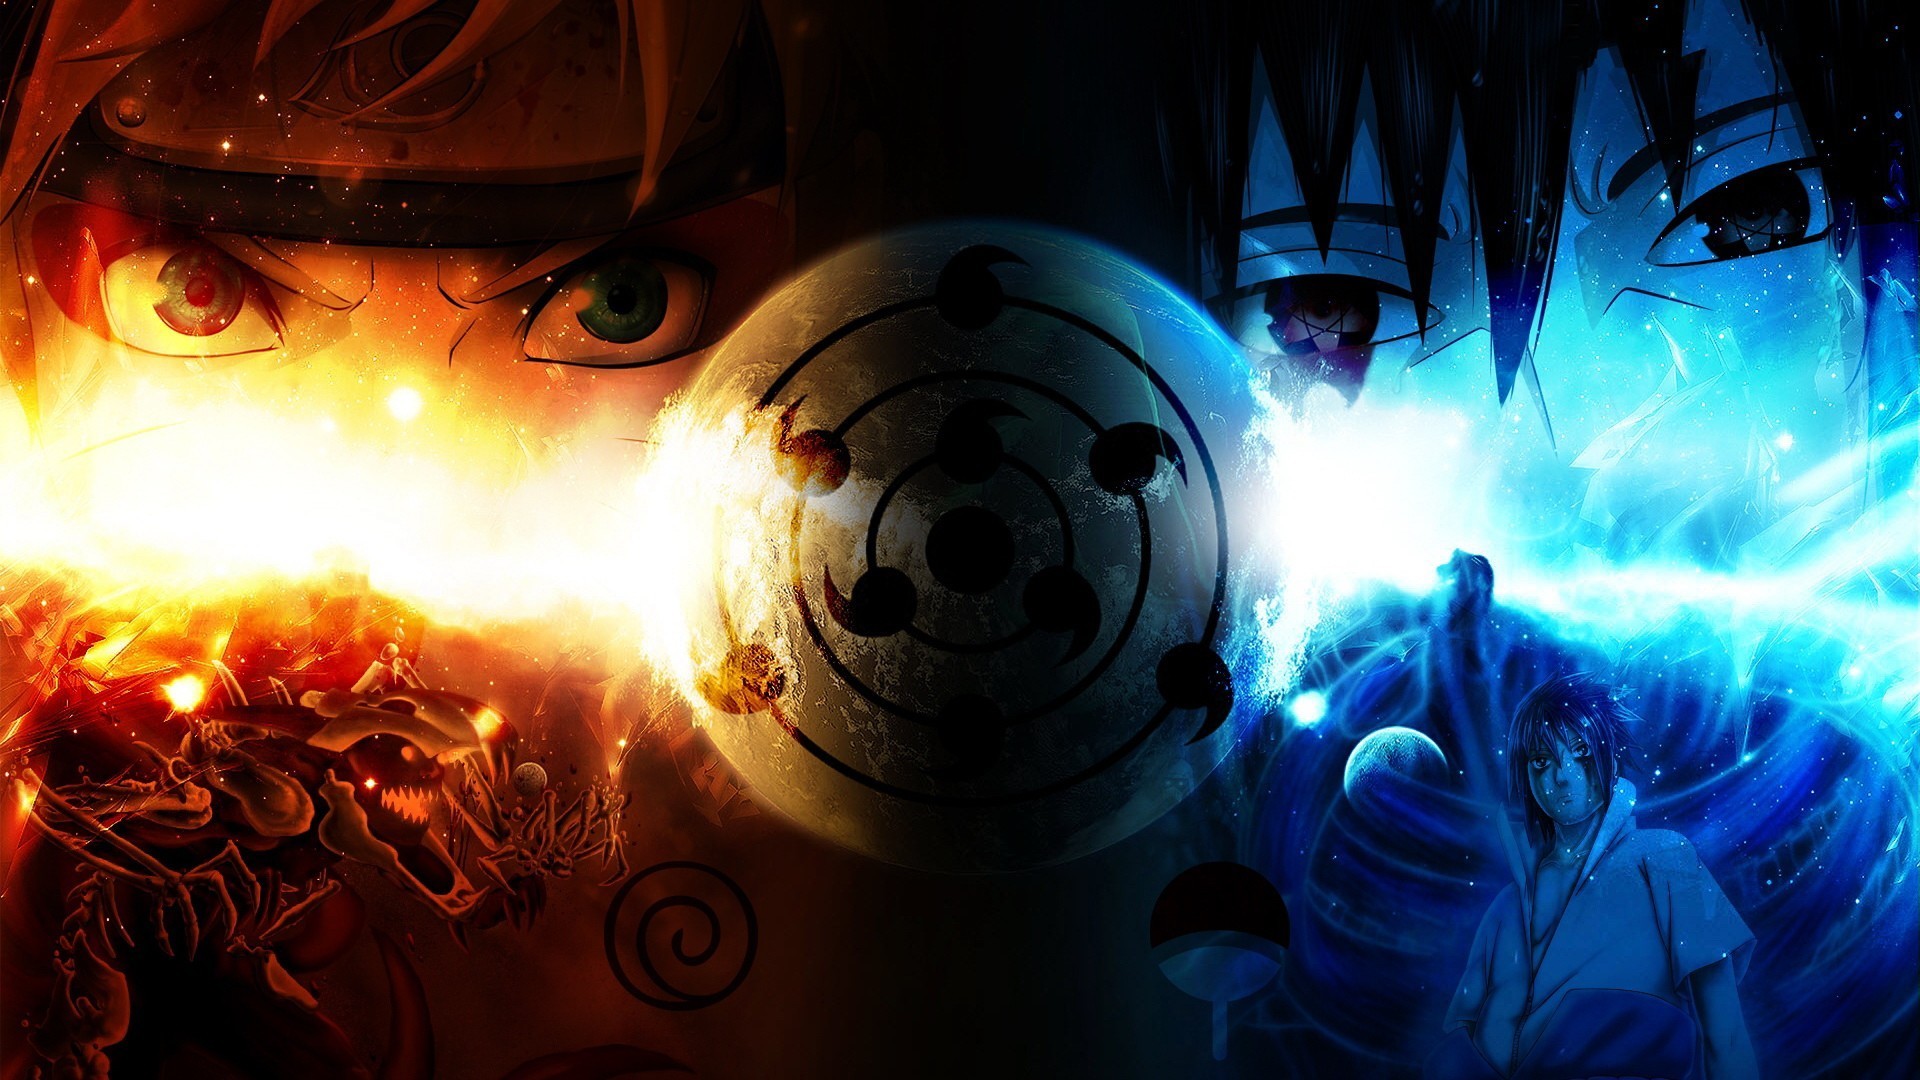 Naruto wallpaper ·① Download free awesome backgrounds for desktop